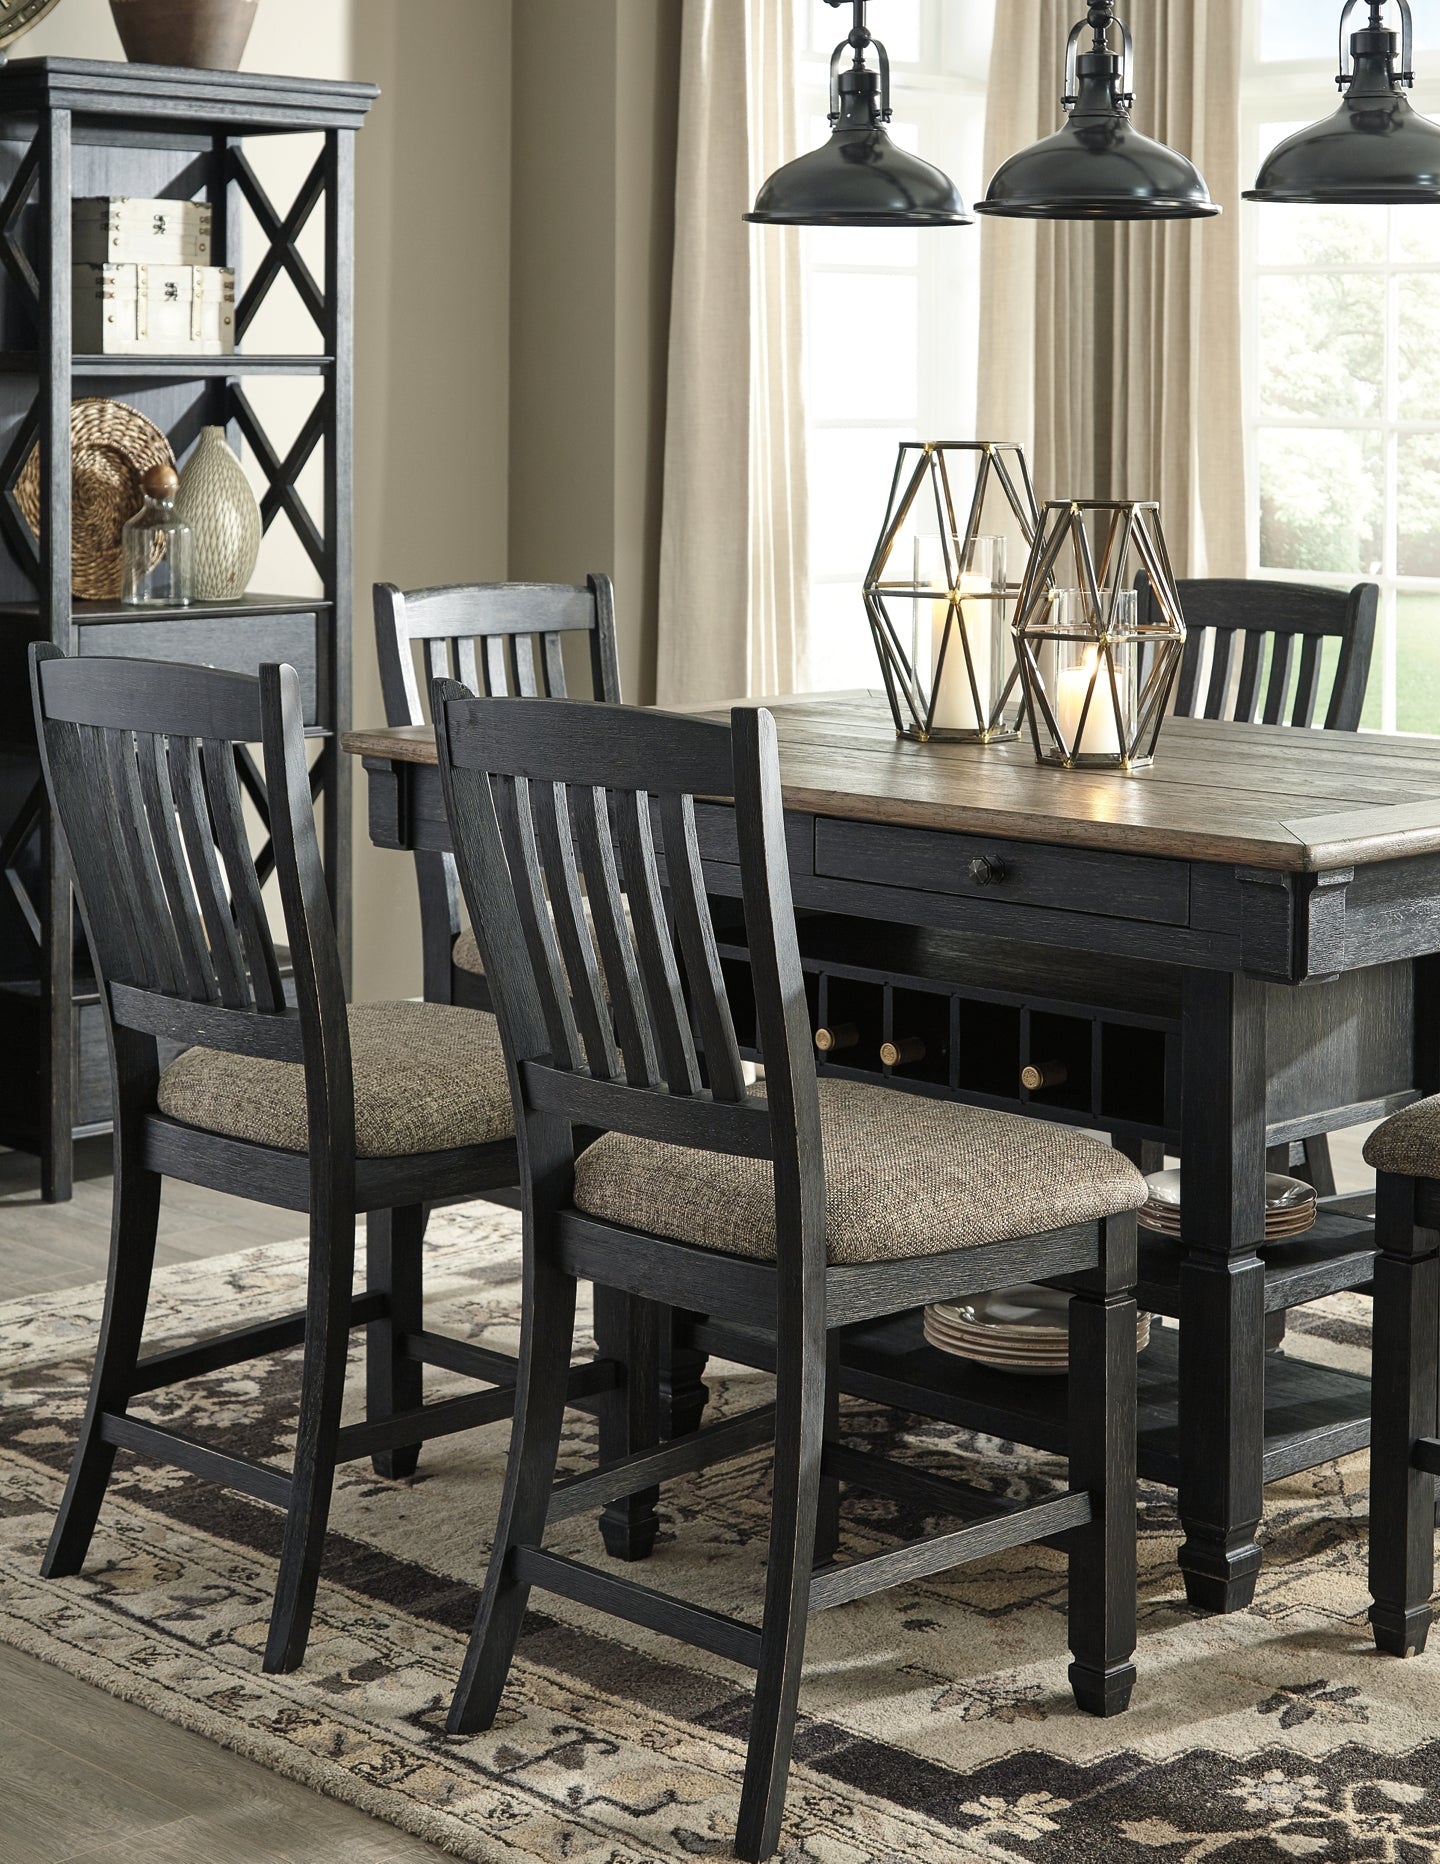 Tyler Creek Counter Height Dining Table and 4 Barstools at Walker Mattress and Furniture Locations in Cedar Park and Belton TX.